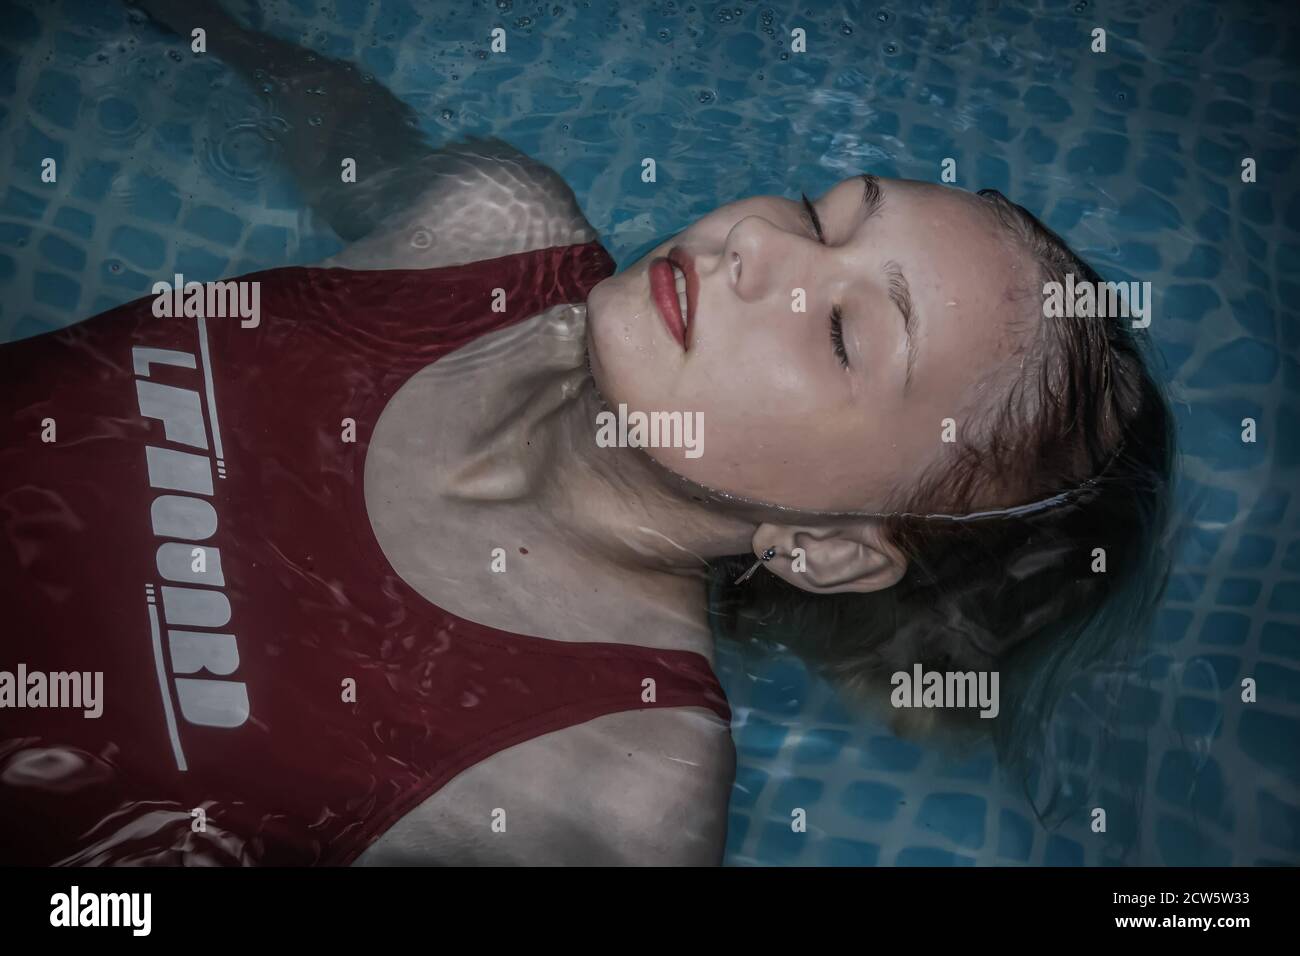 A Young And Beautiful Girl In A Red Bathing Suit Is Lying In The Pool Almost Completely 